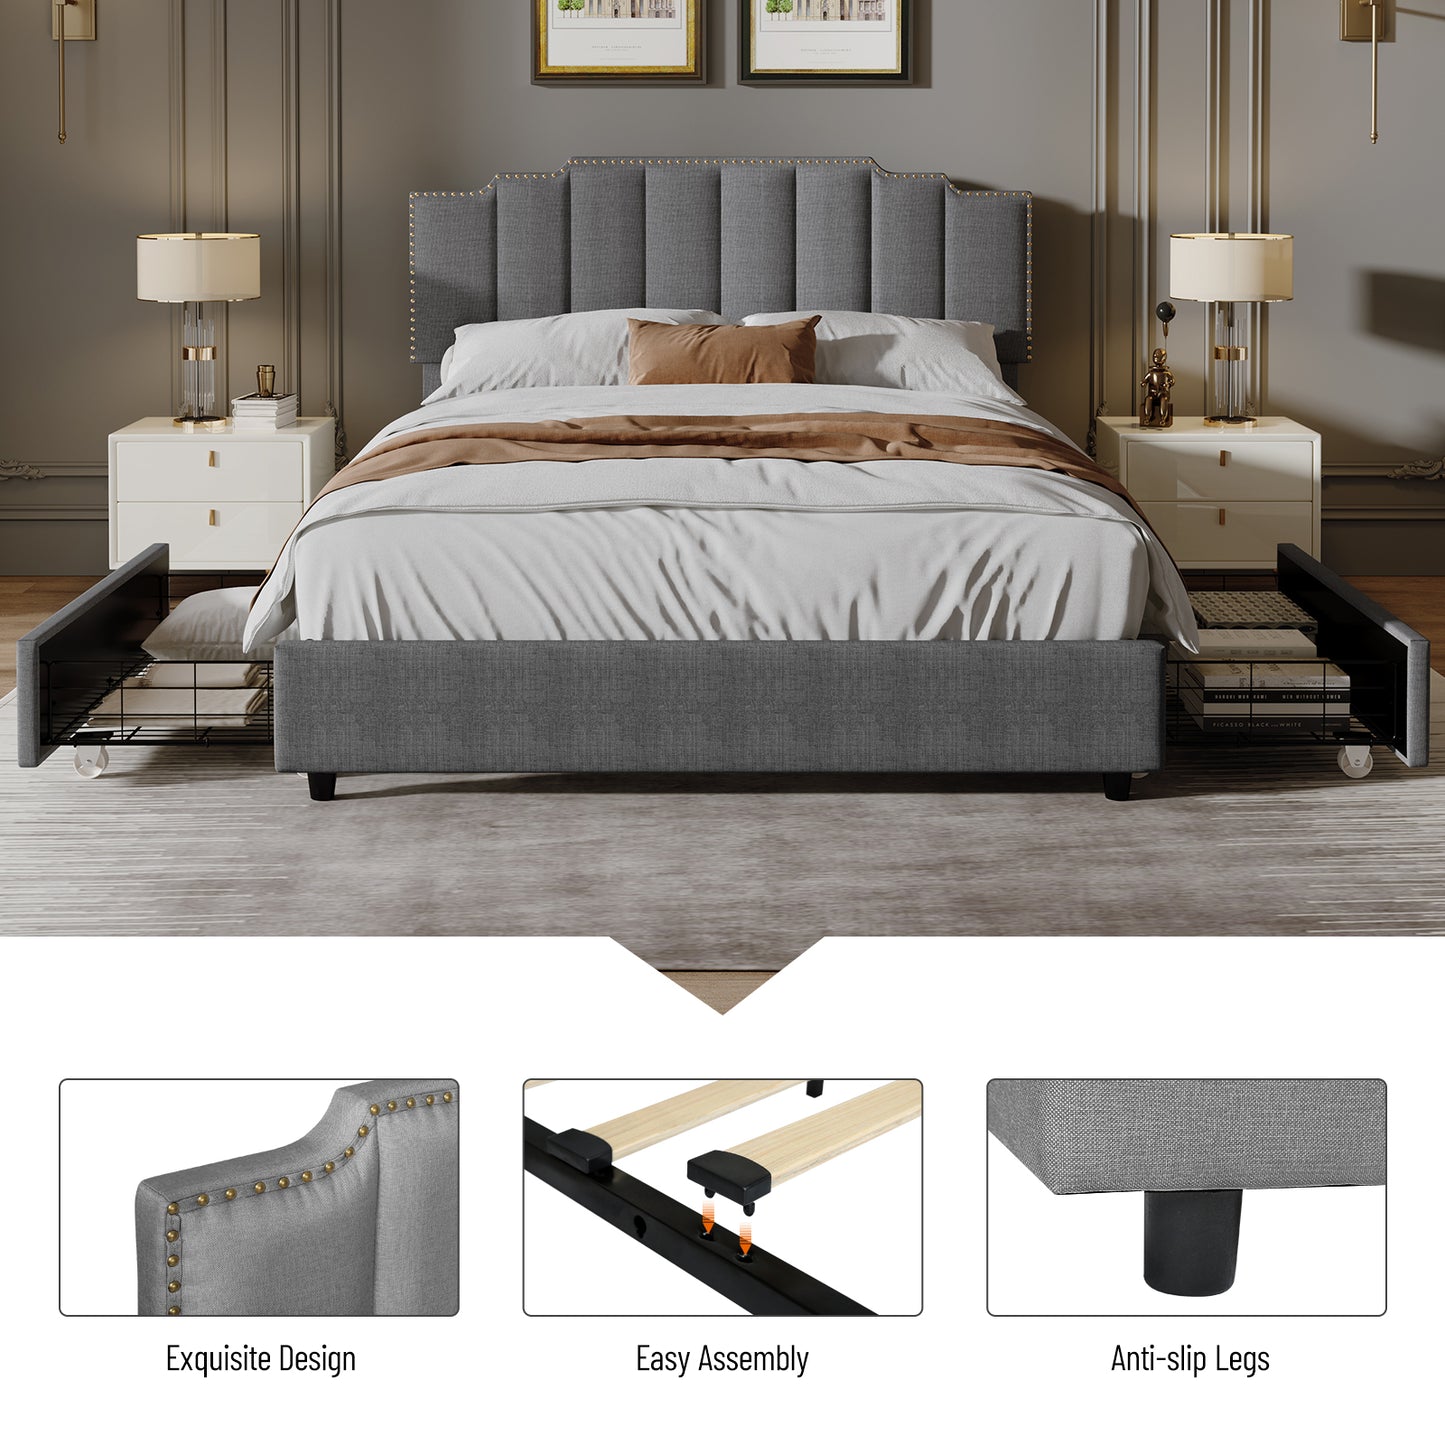 Queen Size Upholstered Platform Bed Linen Bed Frame with 2 Drawers Stitched Padded Headboard with Rivets Design Strong Bed Slats System No Box Spring Needed Grey